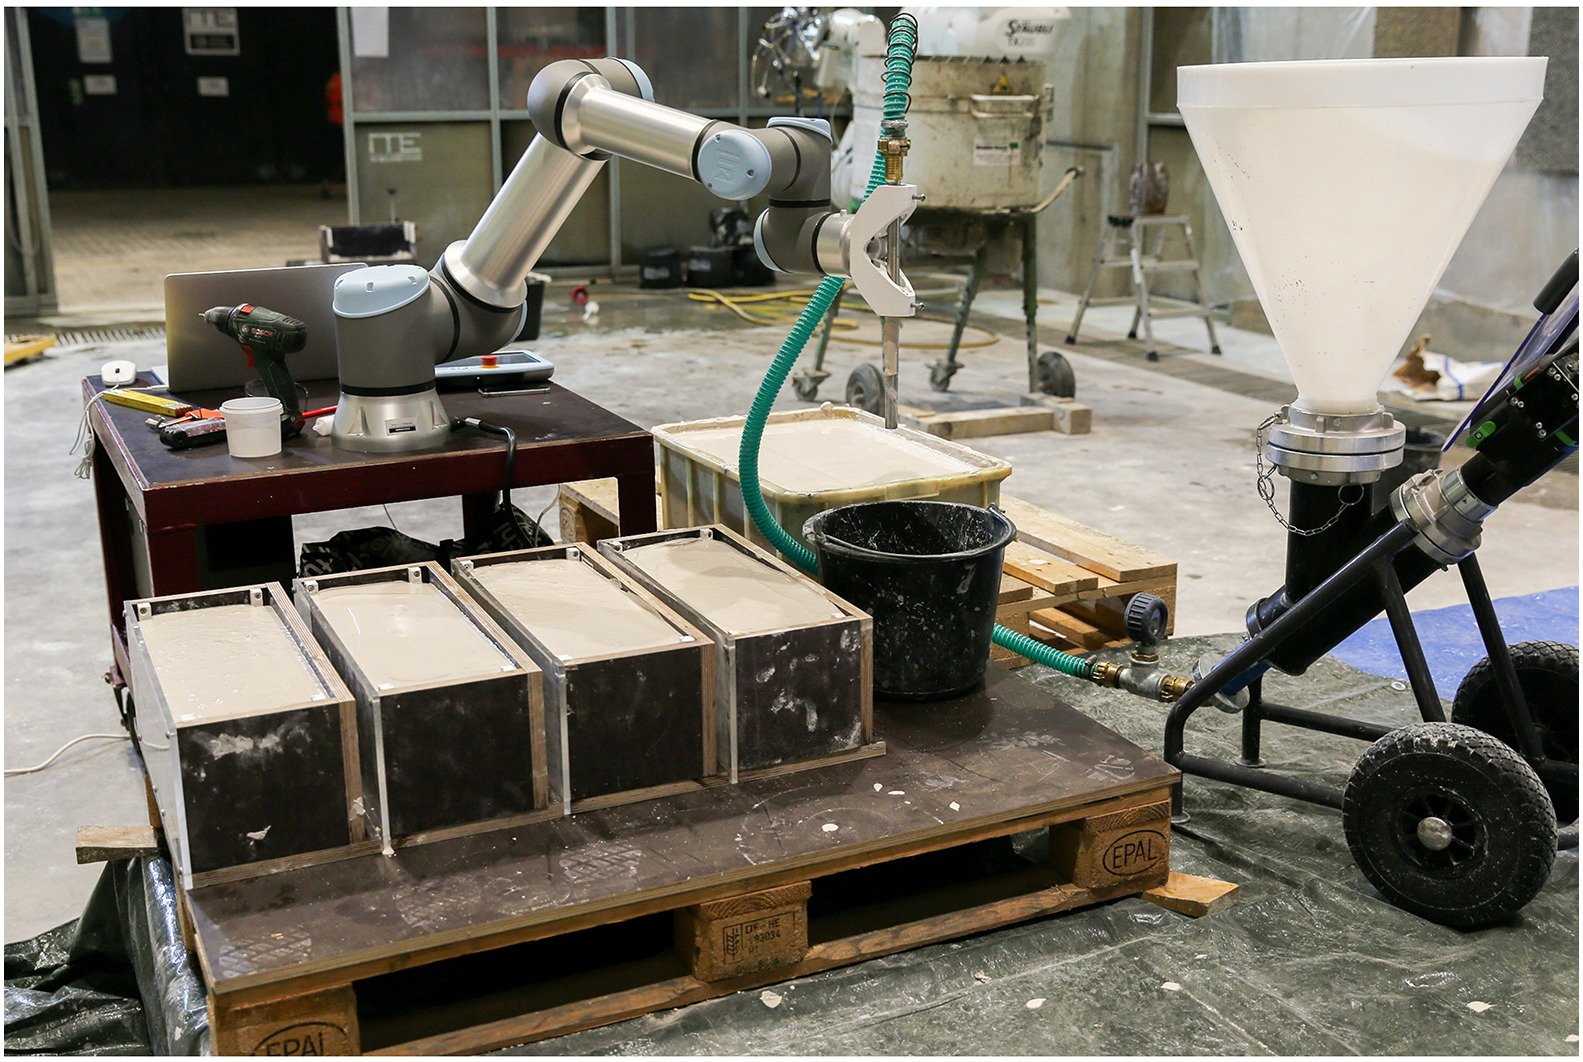 Injection 3D Concrete Printing setup: mixer, pump, robot, and formwork filled with ground limestone suspension. Photo via TU Braunschweig.